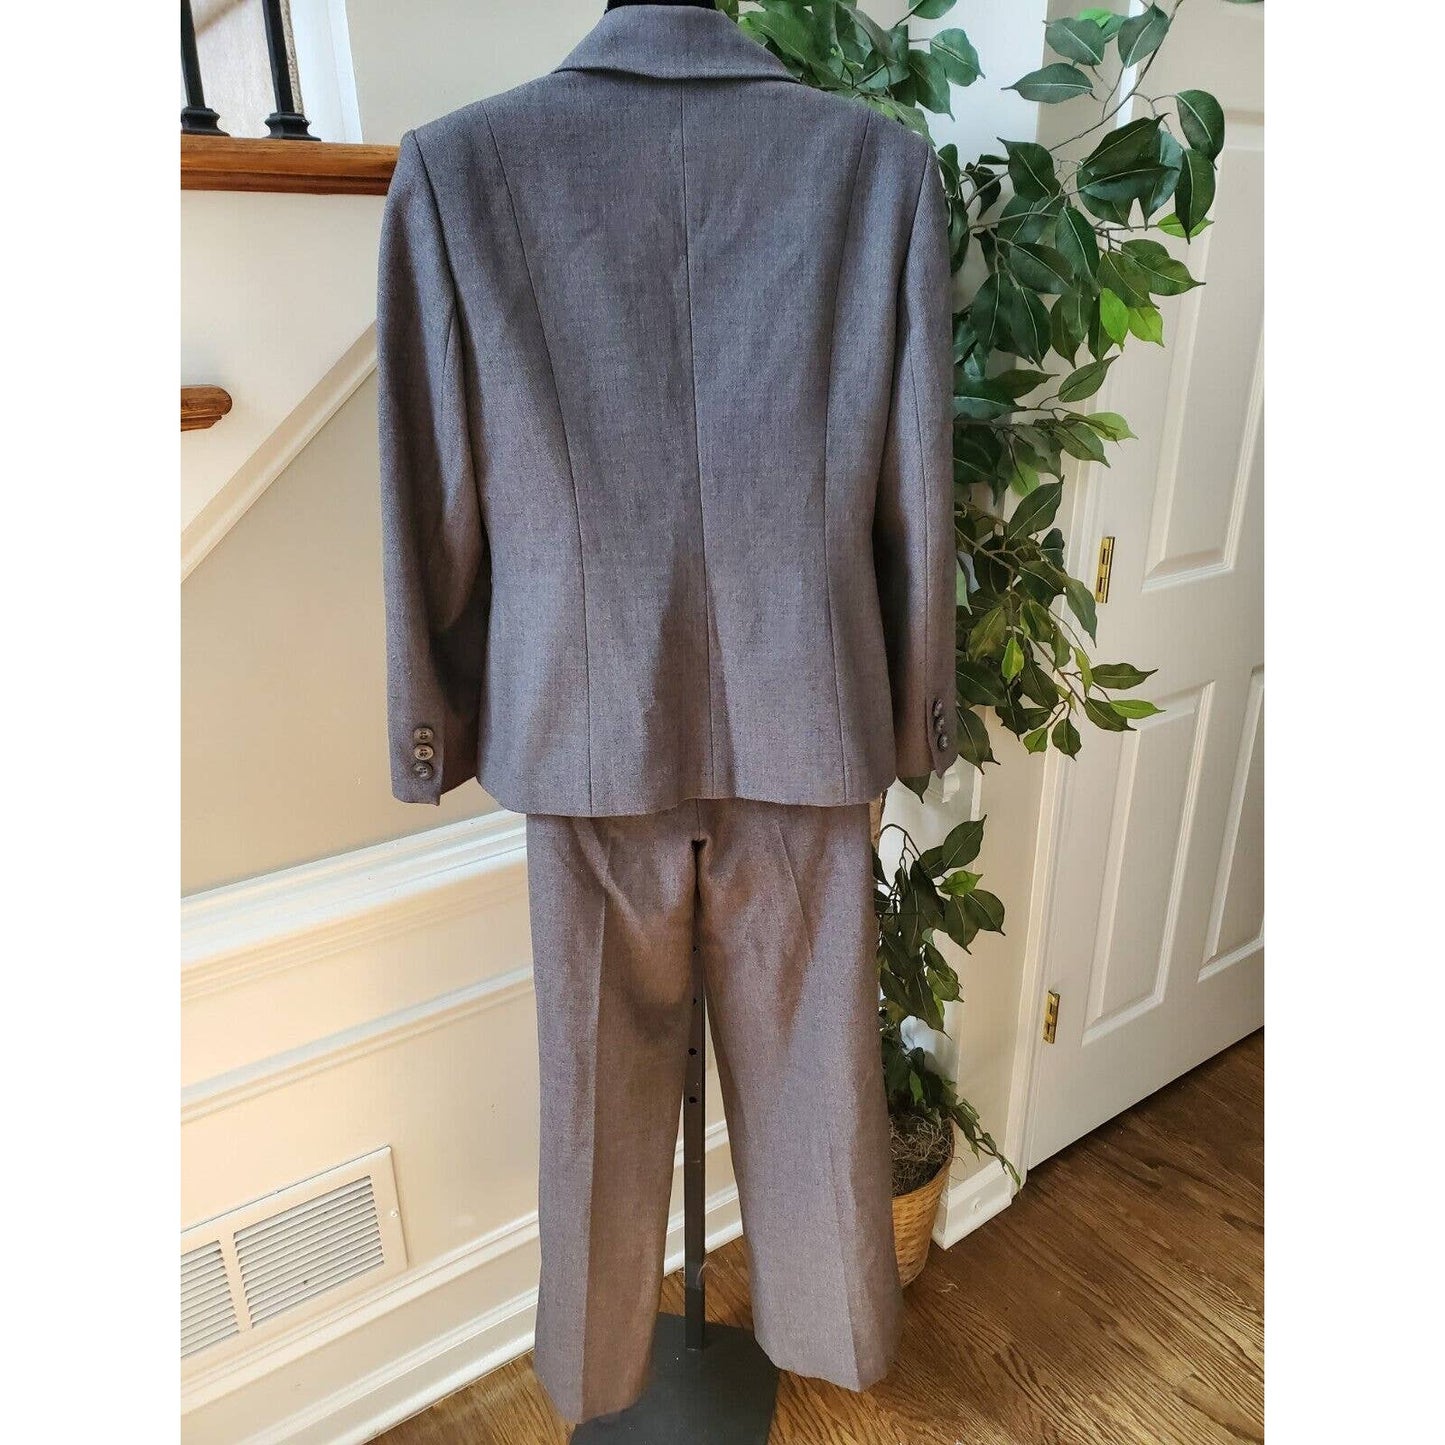 Anne Klein Women's Gray Polyester Single Breasted Blazer & Pant 2 Piece Suit 6P